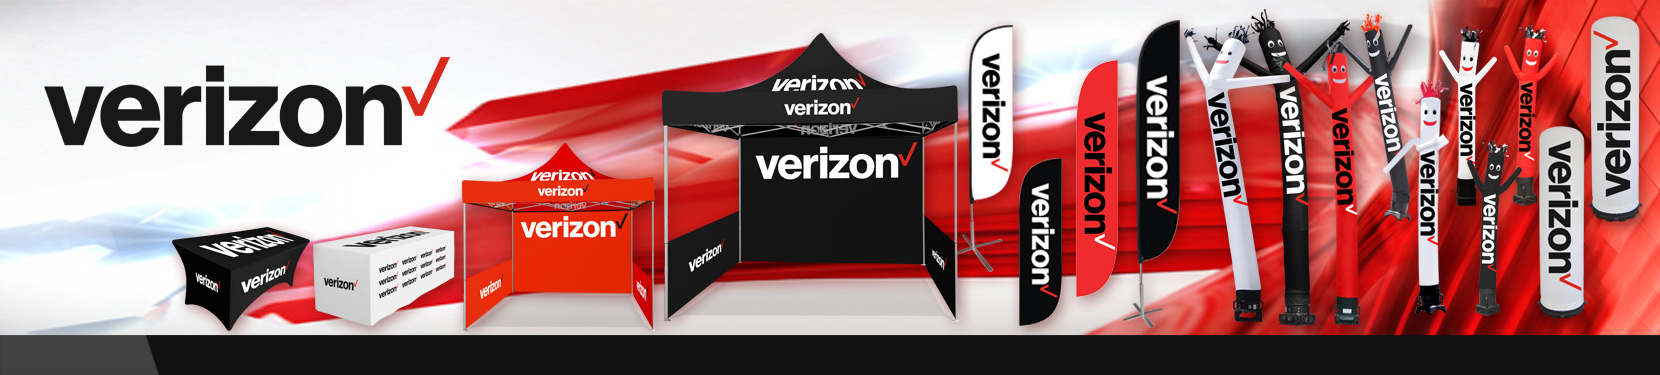 verizon-wireless-feather-flags-air-dancers-pop-up-tent-canopies-and-promotional-products-a.jpg